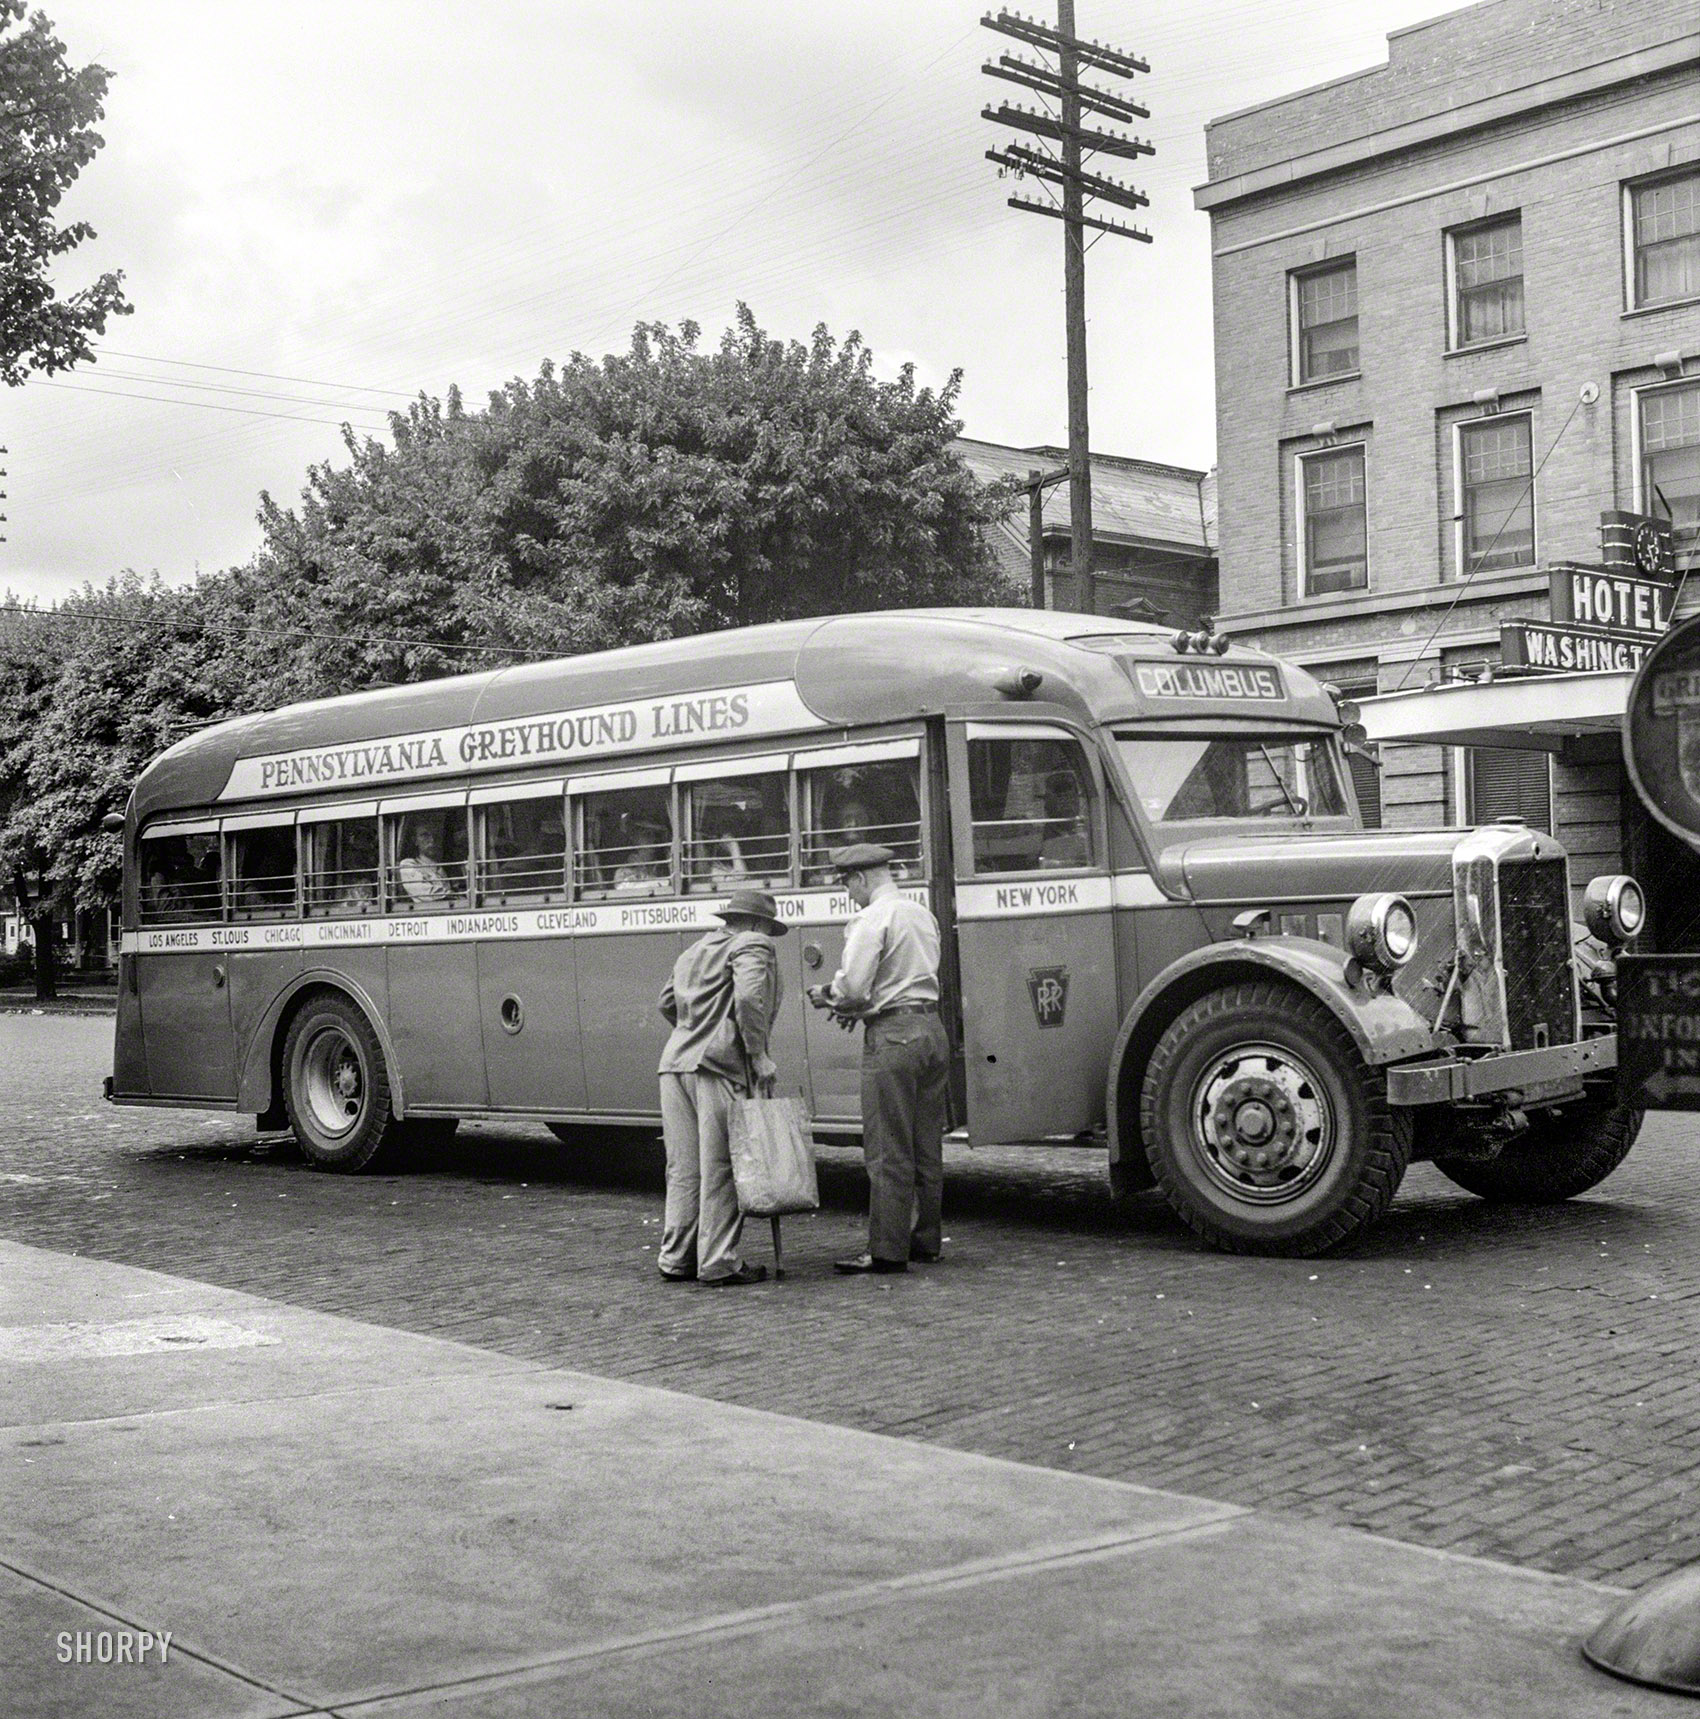 September 1943. "Washington Court House, Ohio. Passenger boarding Greyhound bus." Photo by Esther Bubley for the Office of War Information. View full size.